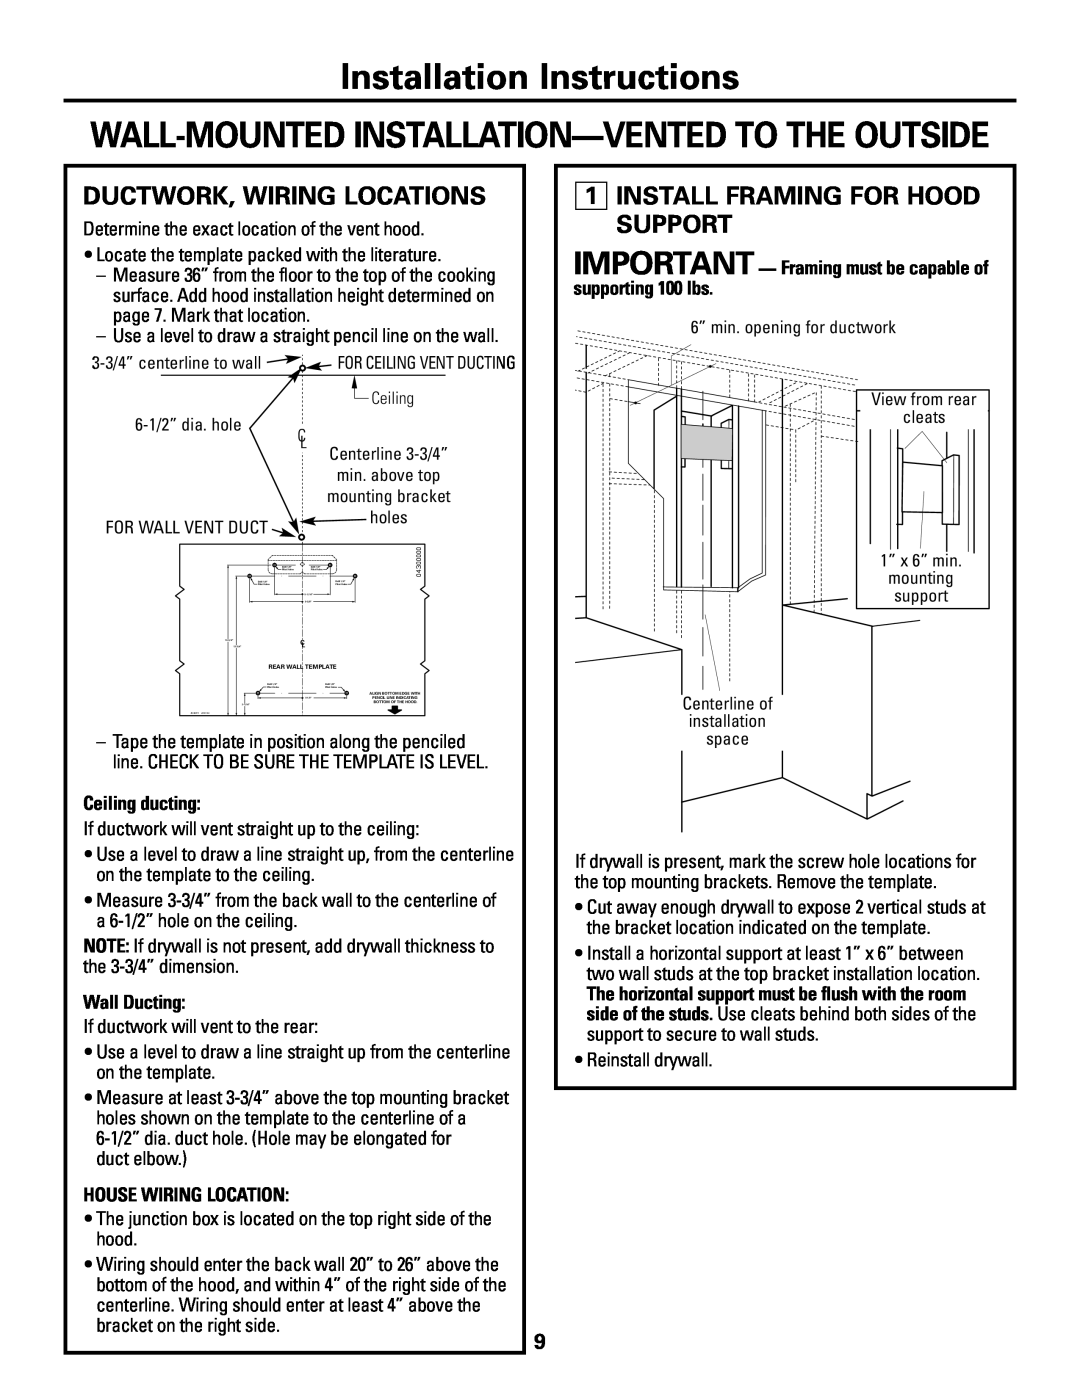 GE ZV800 Installation Instructions, Wall-Mounted Installation-Vented To The Outside, Ductwork, Wiring Locations 